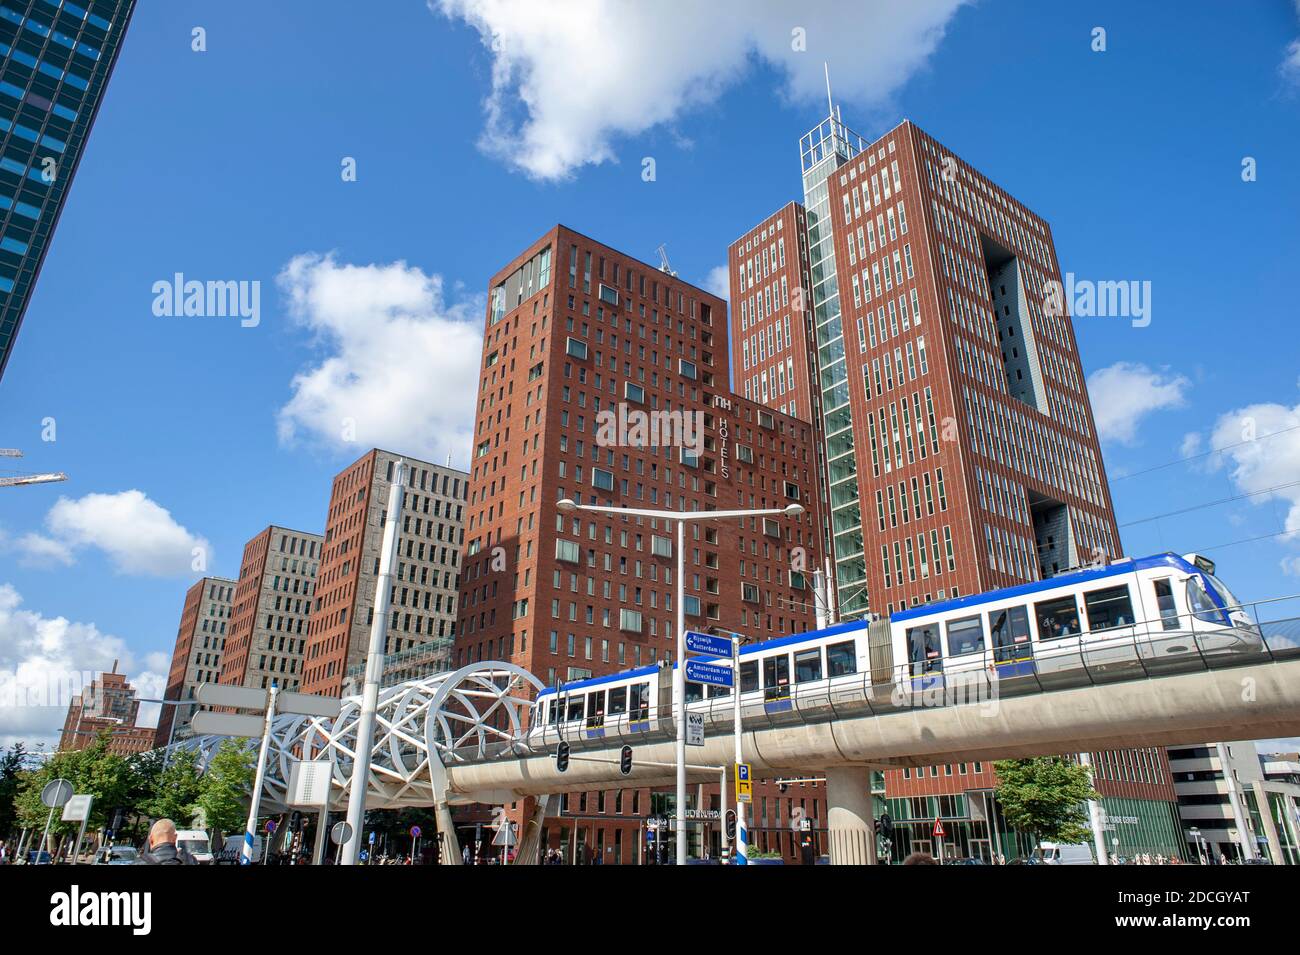 RandstadRail station, Beatrixkwartier, The Hague, The Netherlands. 20th August, 2019. Designed by ZJA Zwarts & Jansma Architects. The spatial tube con Stock Photo